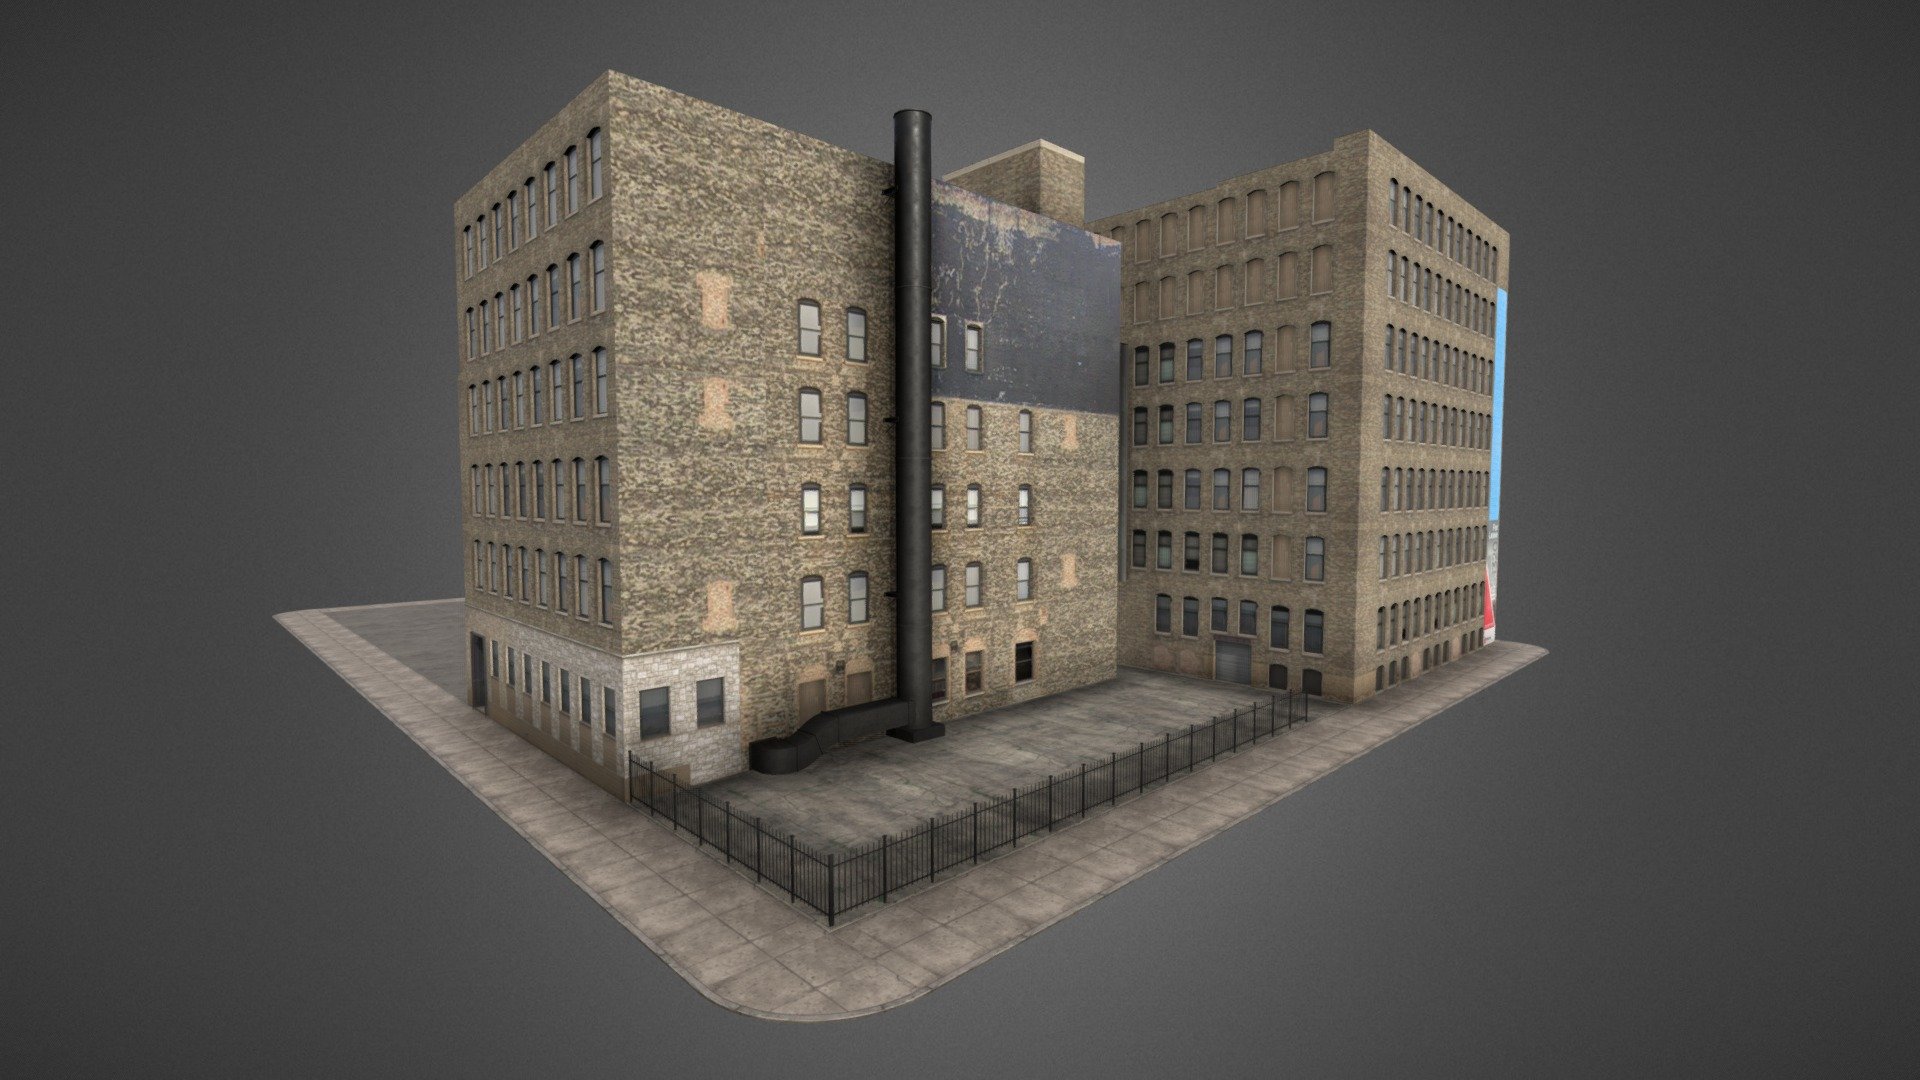 623 N Orleans St
Chicago, Illinois

A recreation of an Industrial site in Chicago 3d model